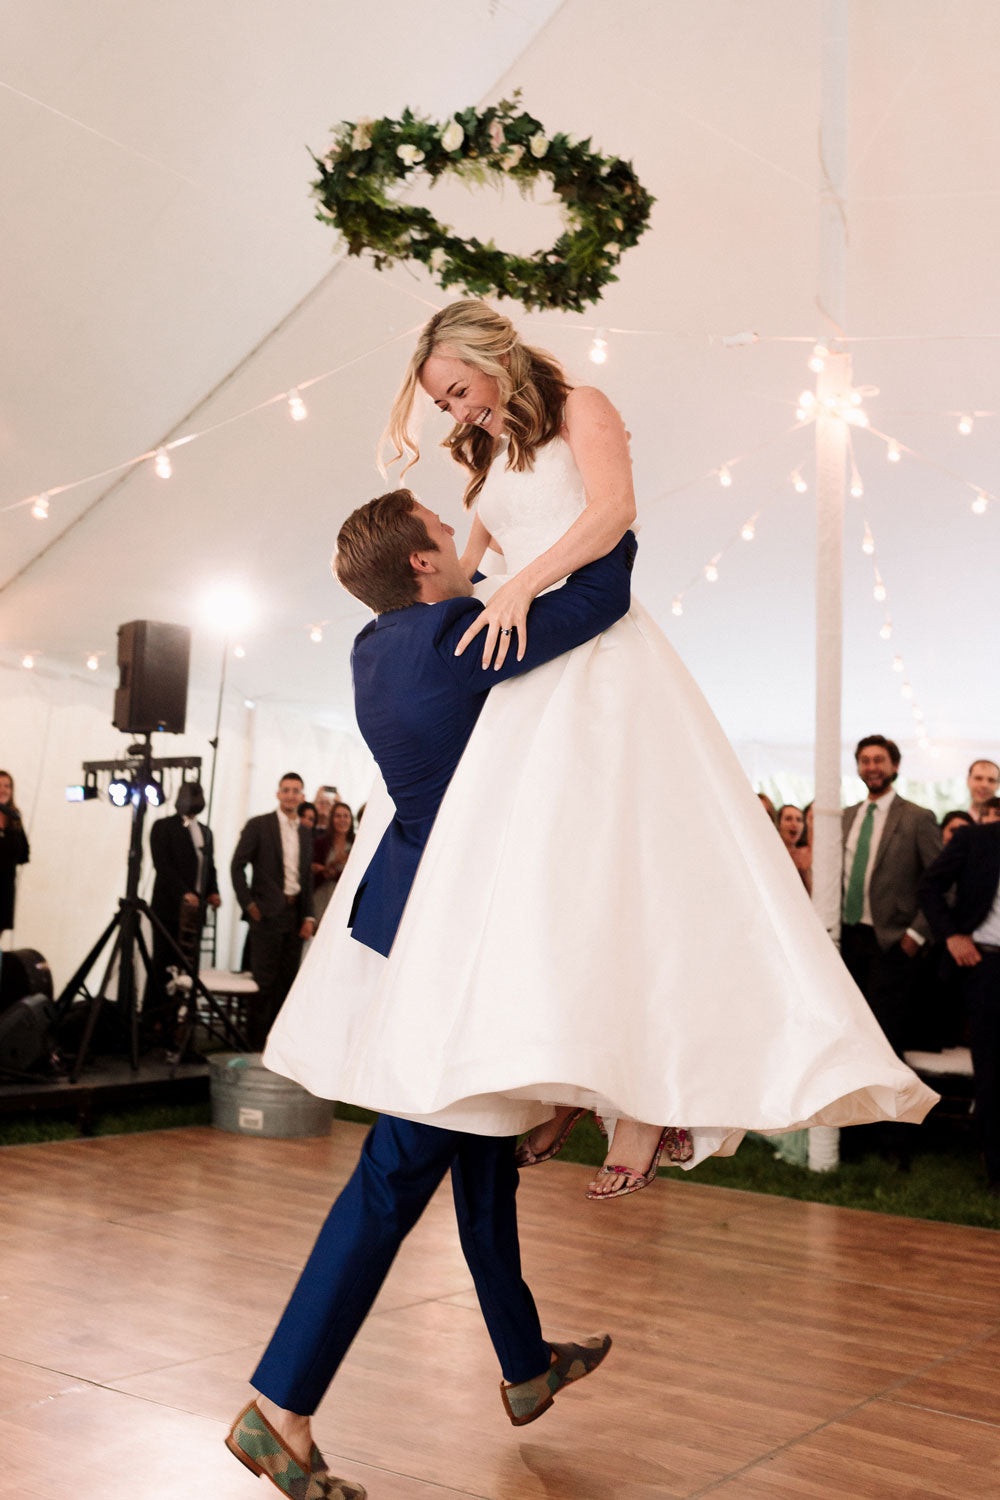 Christina and Alex dancing their first dance in men's kilim loafers.